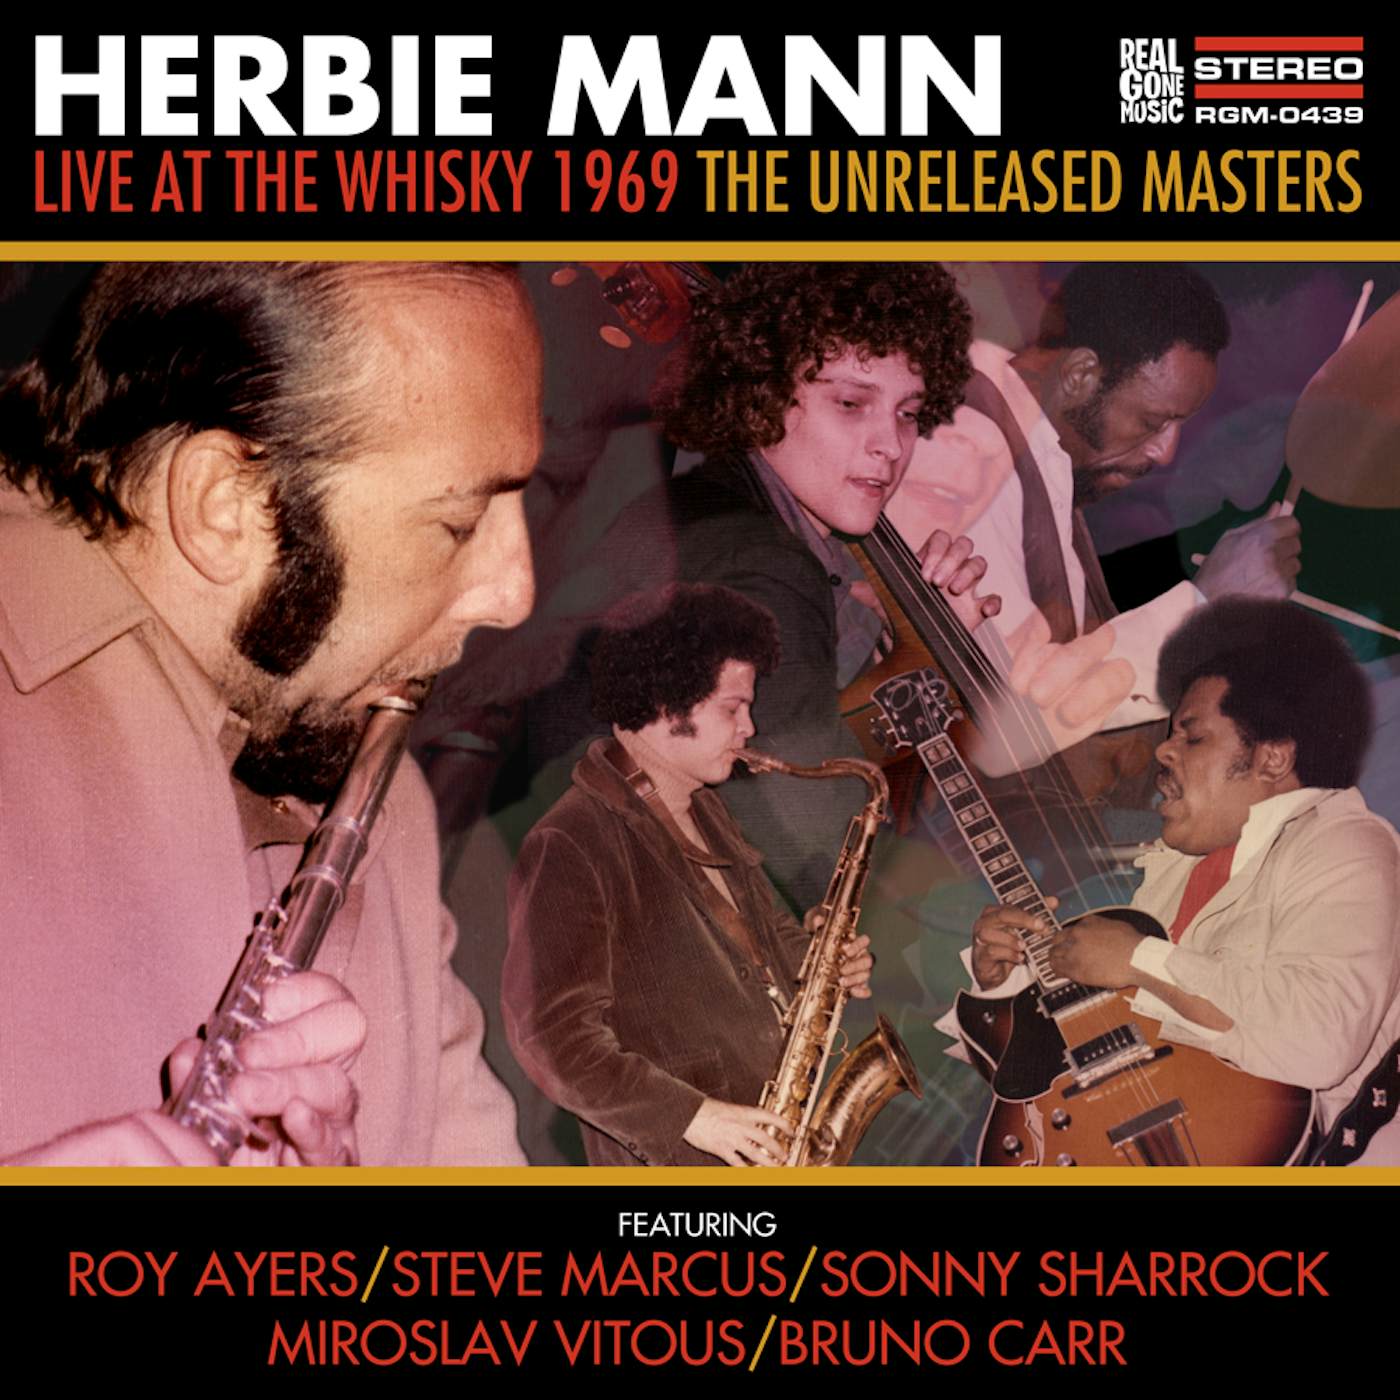 Herbie Mann LIVE AT THE WHISKEY 1969: THE UNRELEASED MASTERS CD